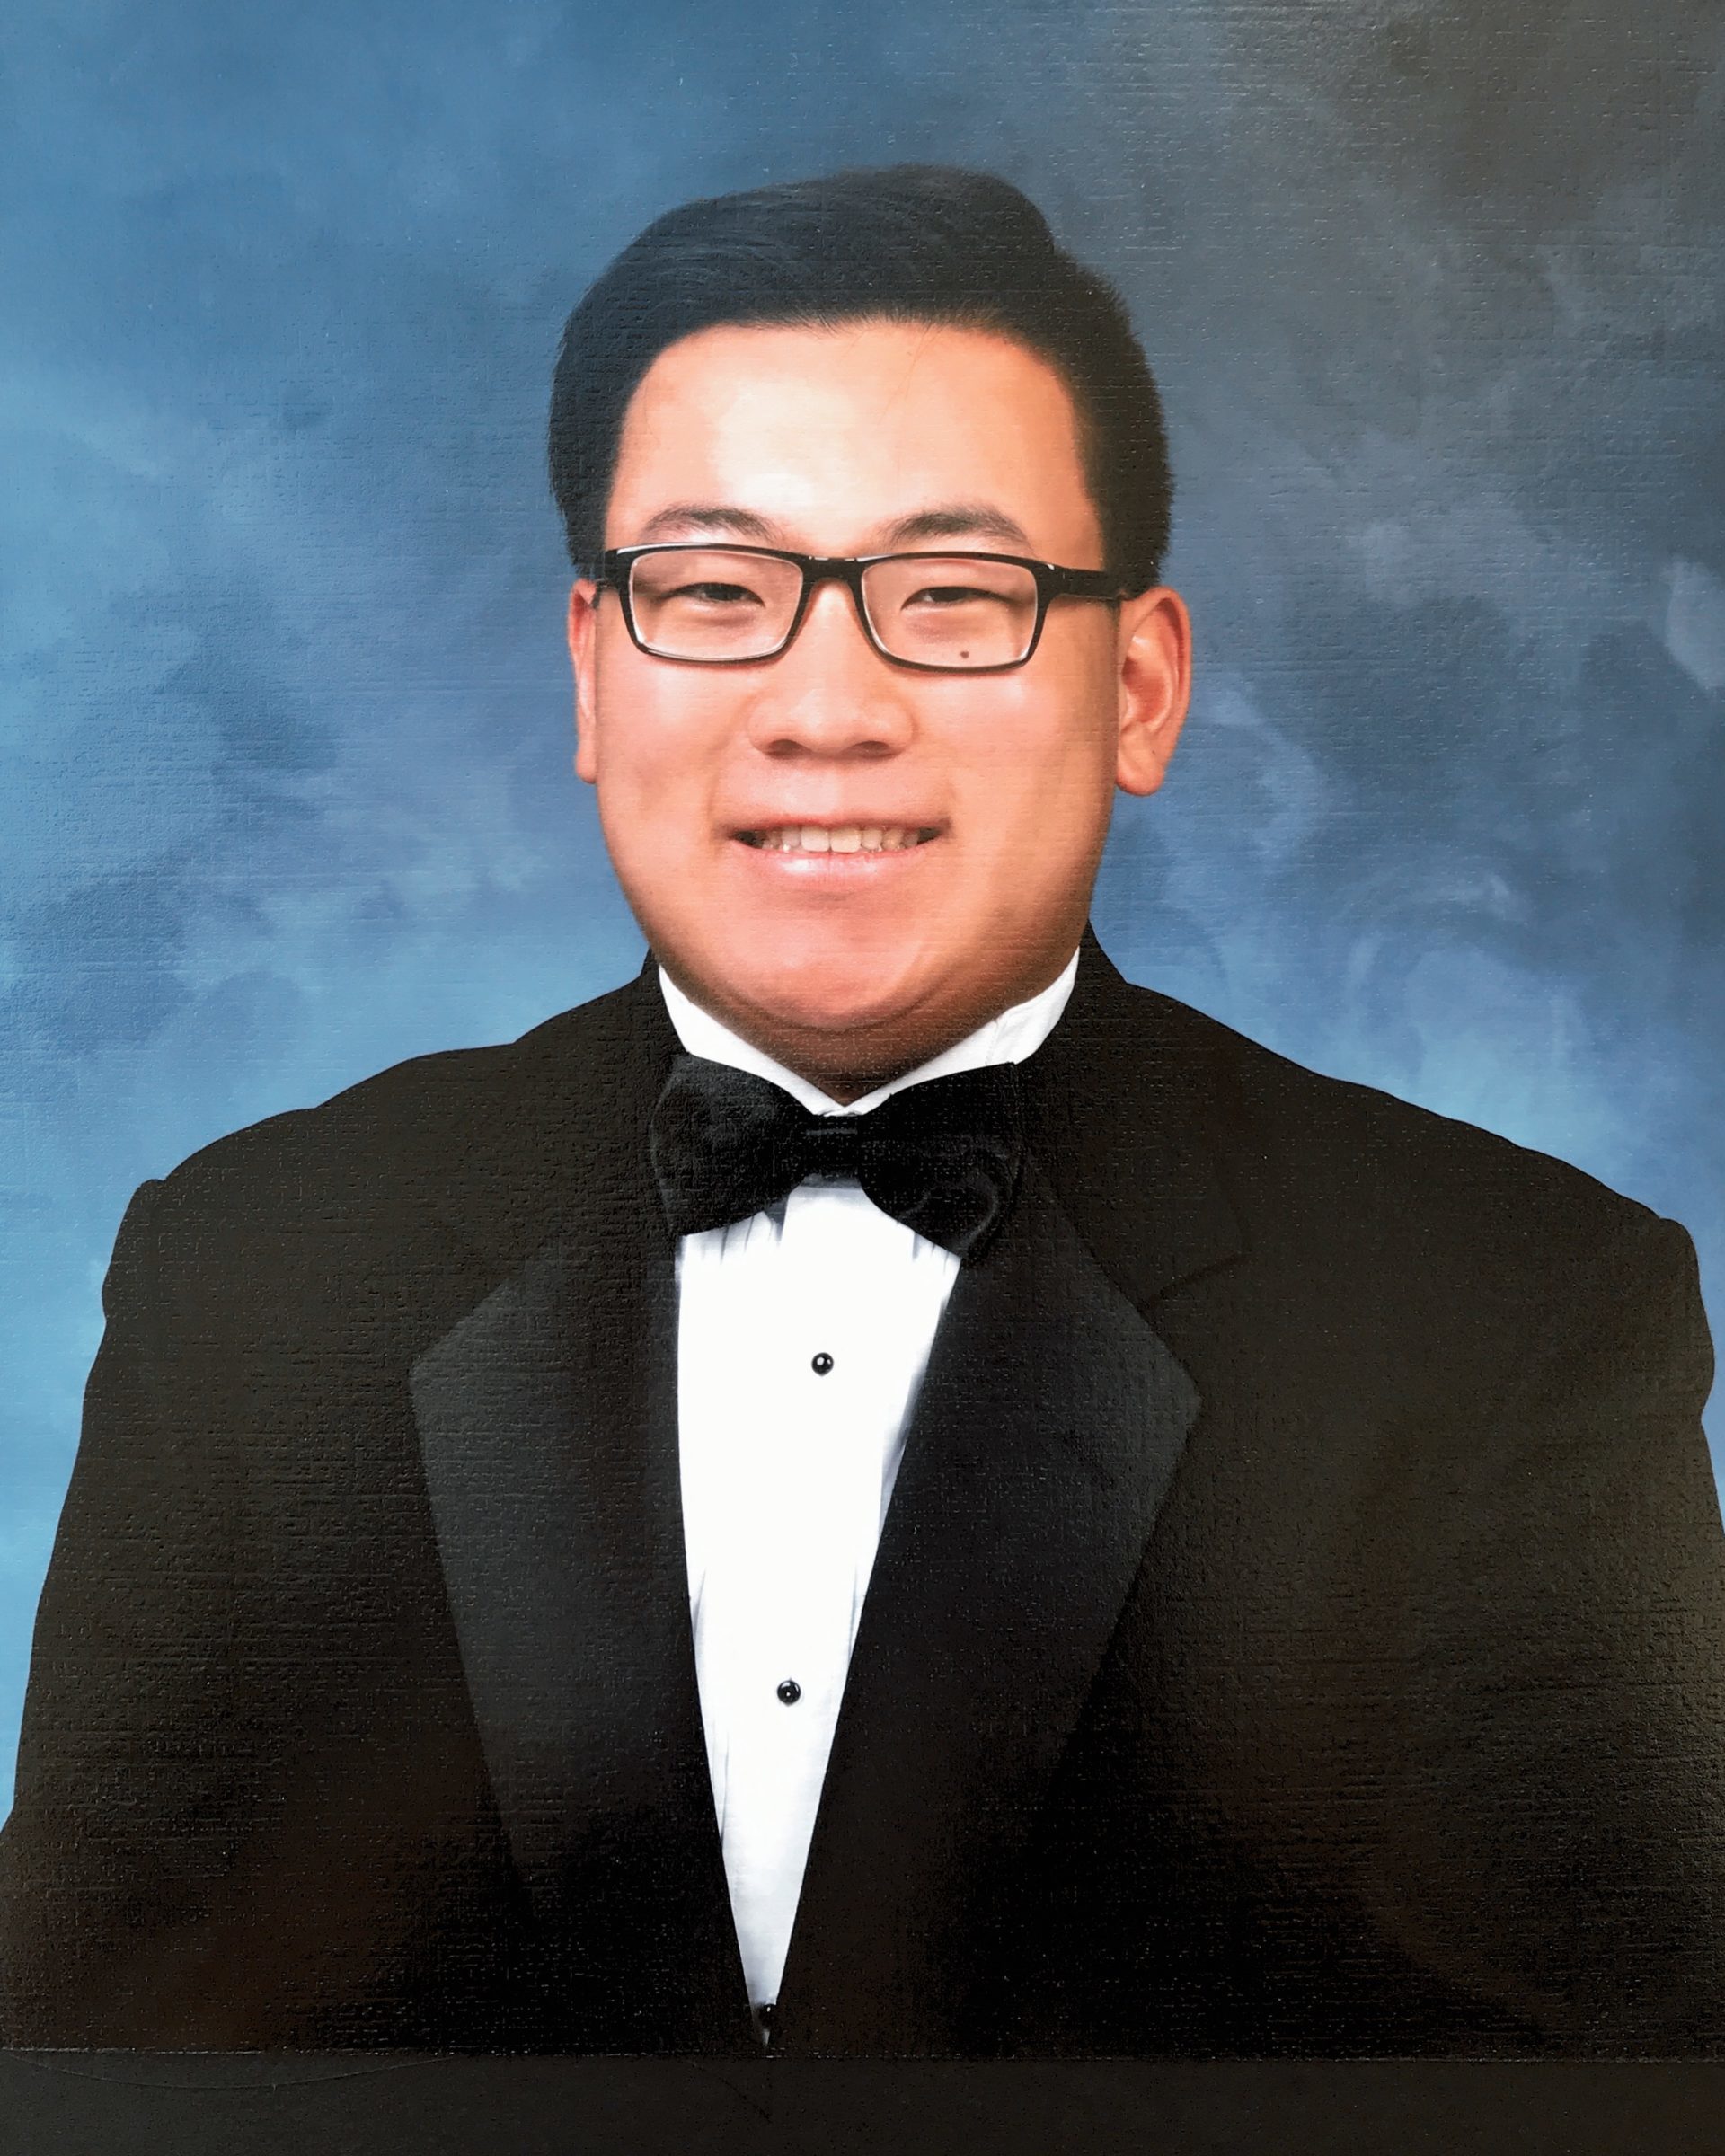 school photo of smiling man in black tuxedo and glasses